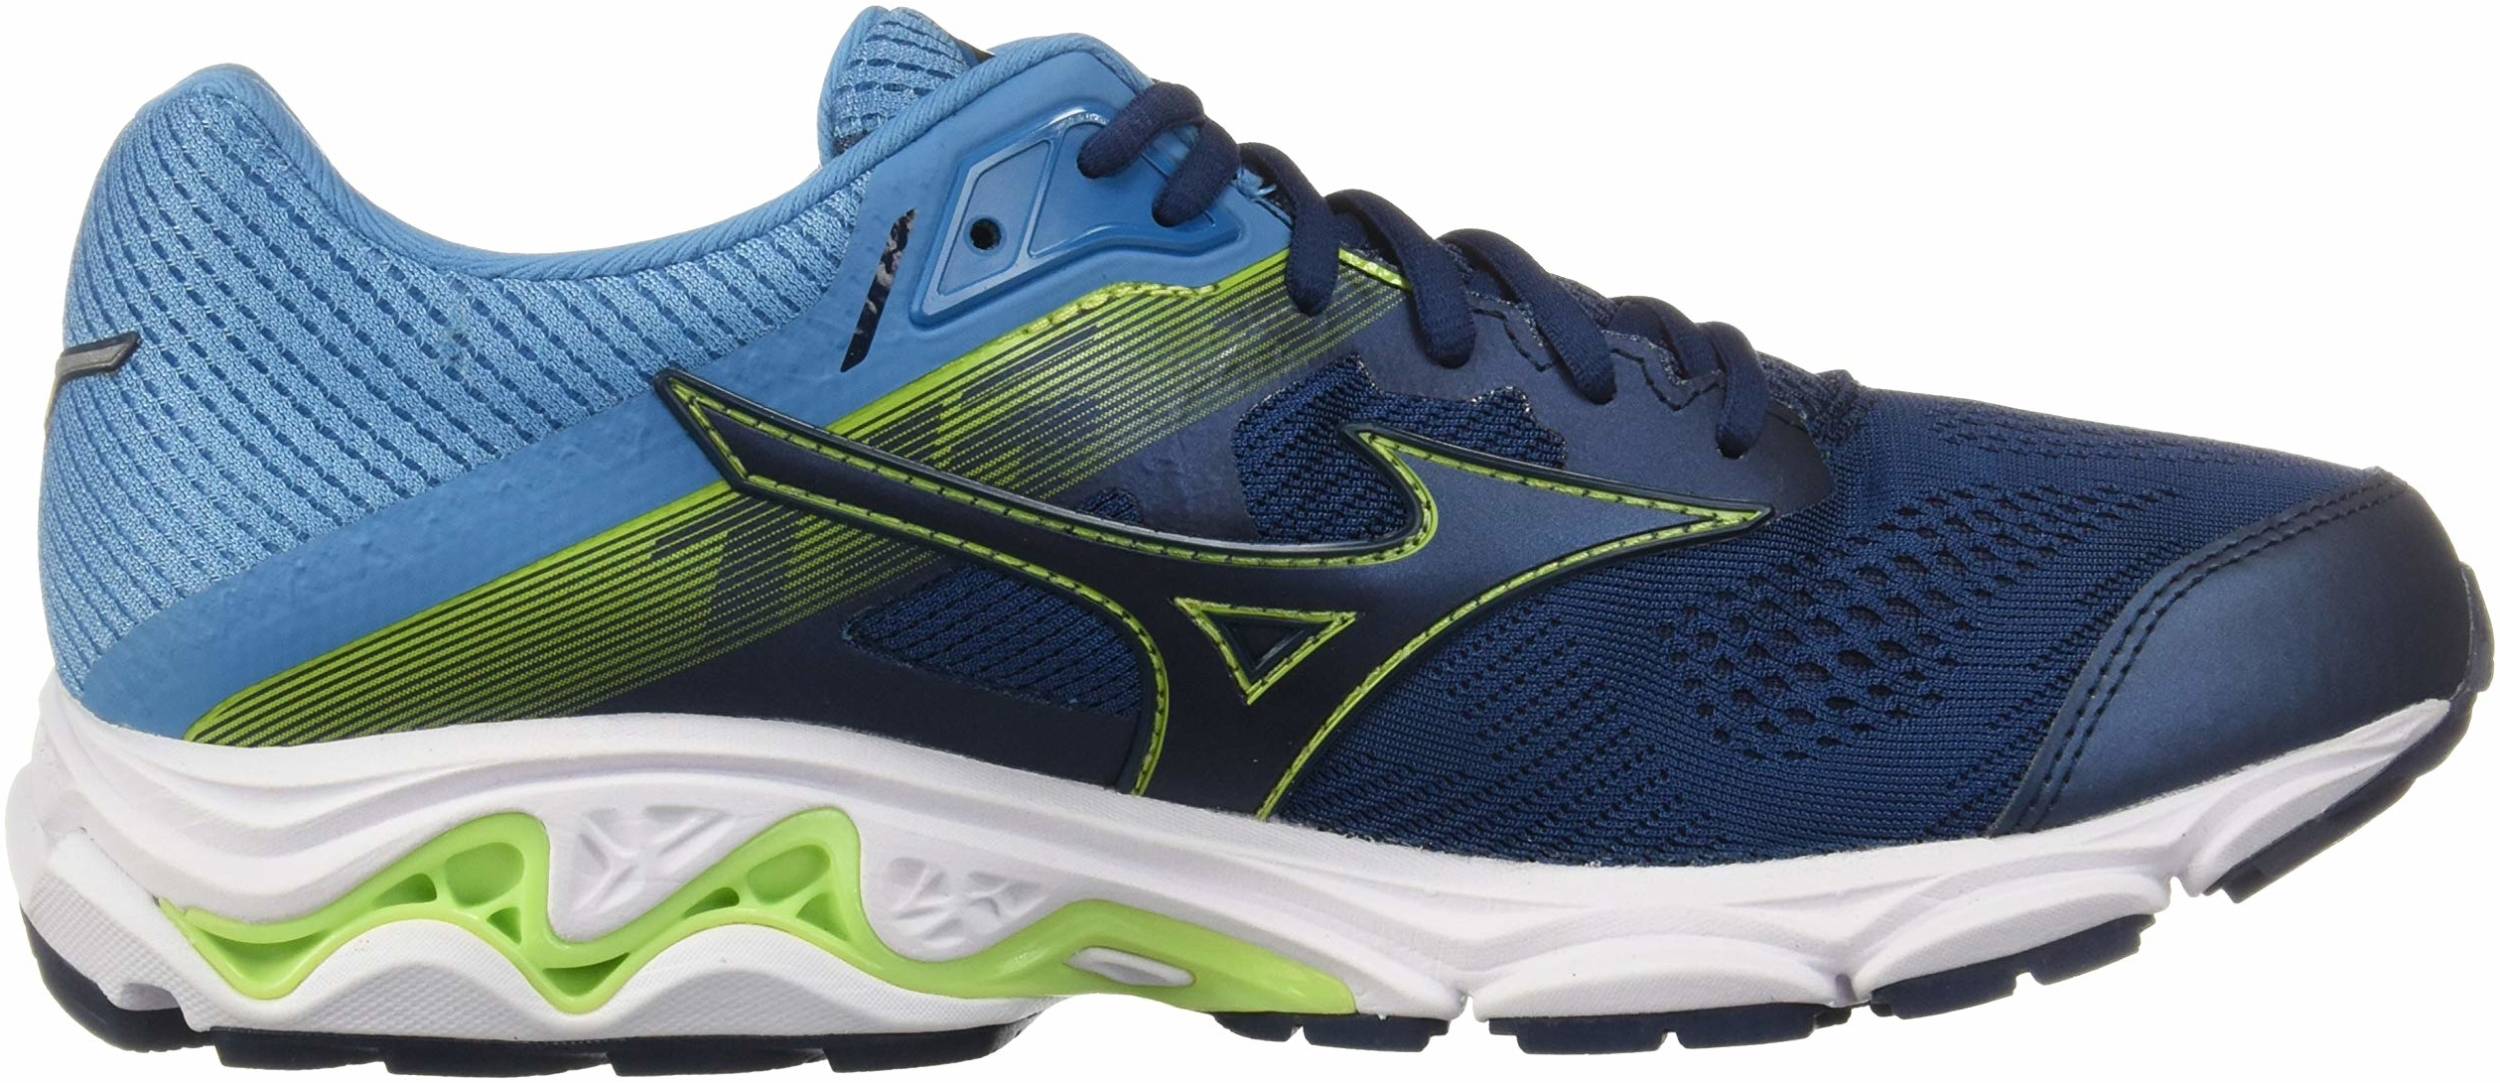 Mizuno Womens Wave Inspire 15 Running Shoes Trainers Sneakers Blue Sports 